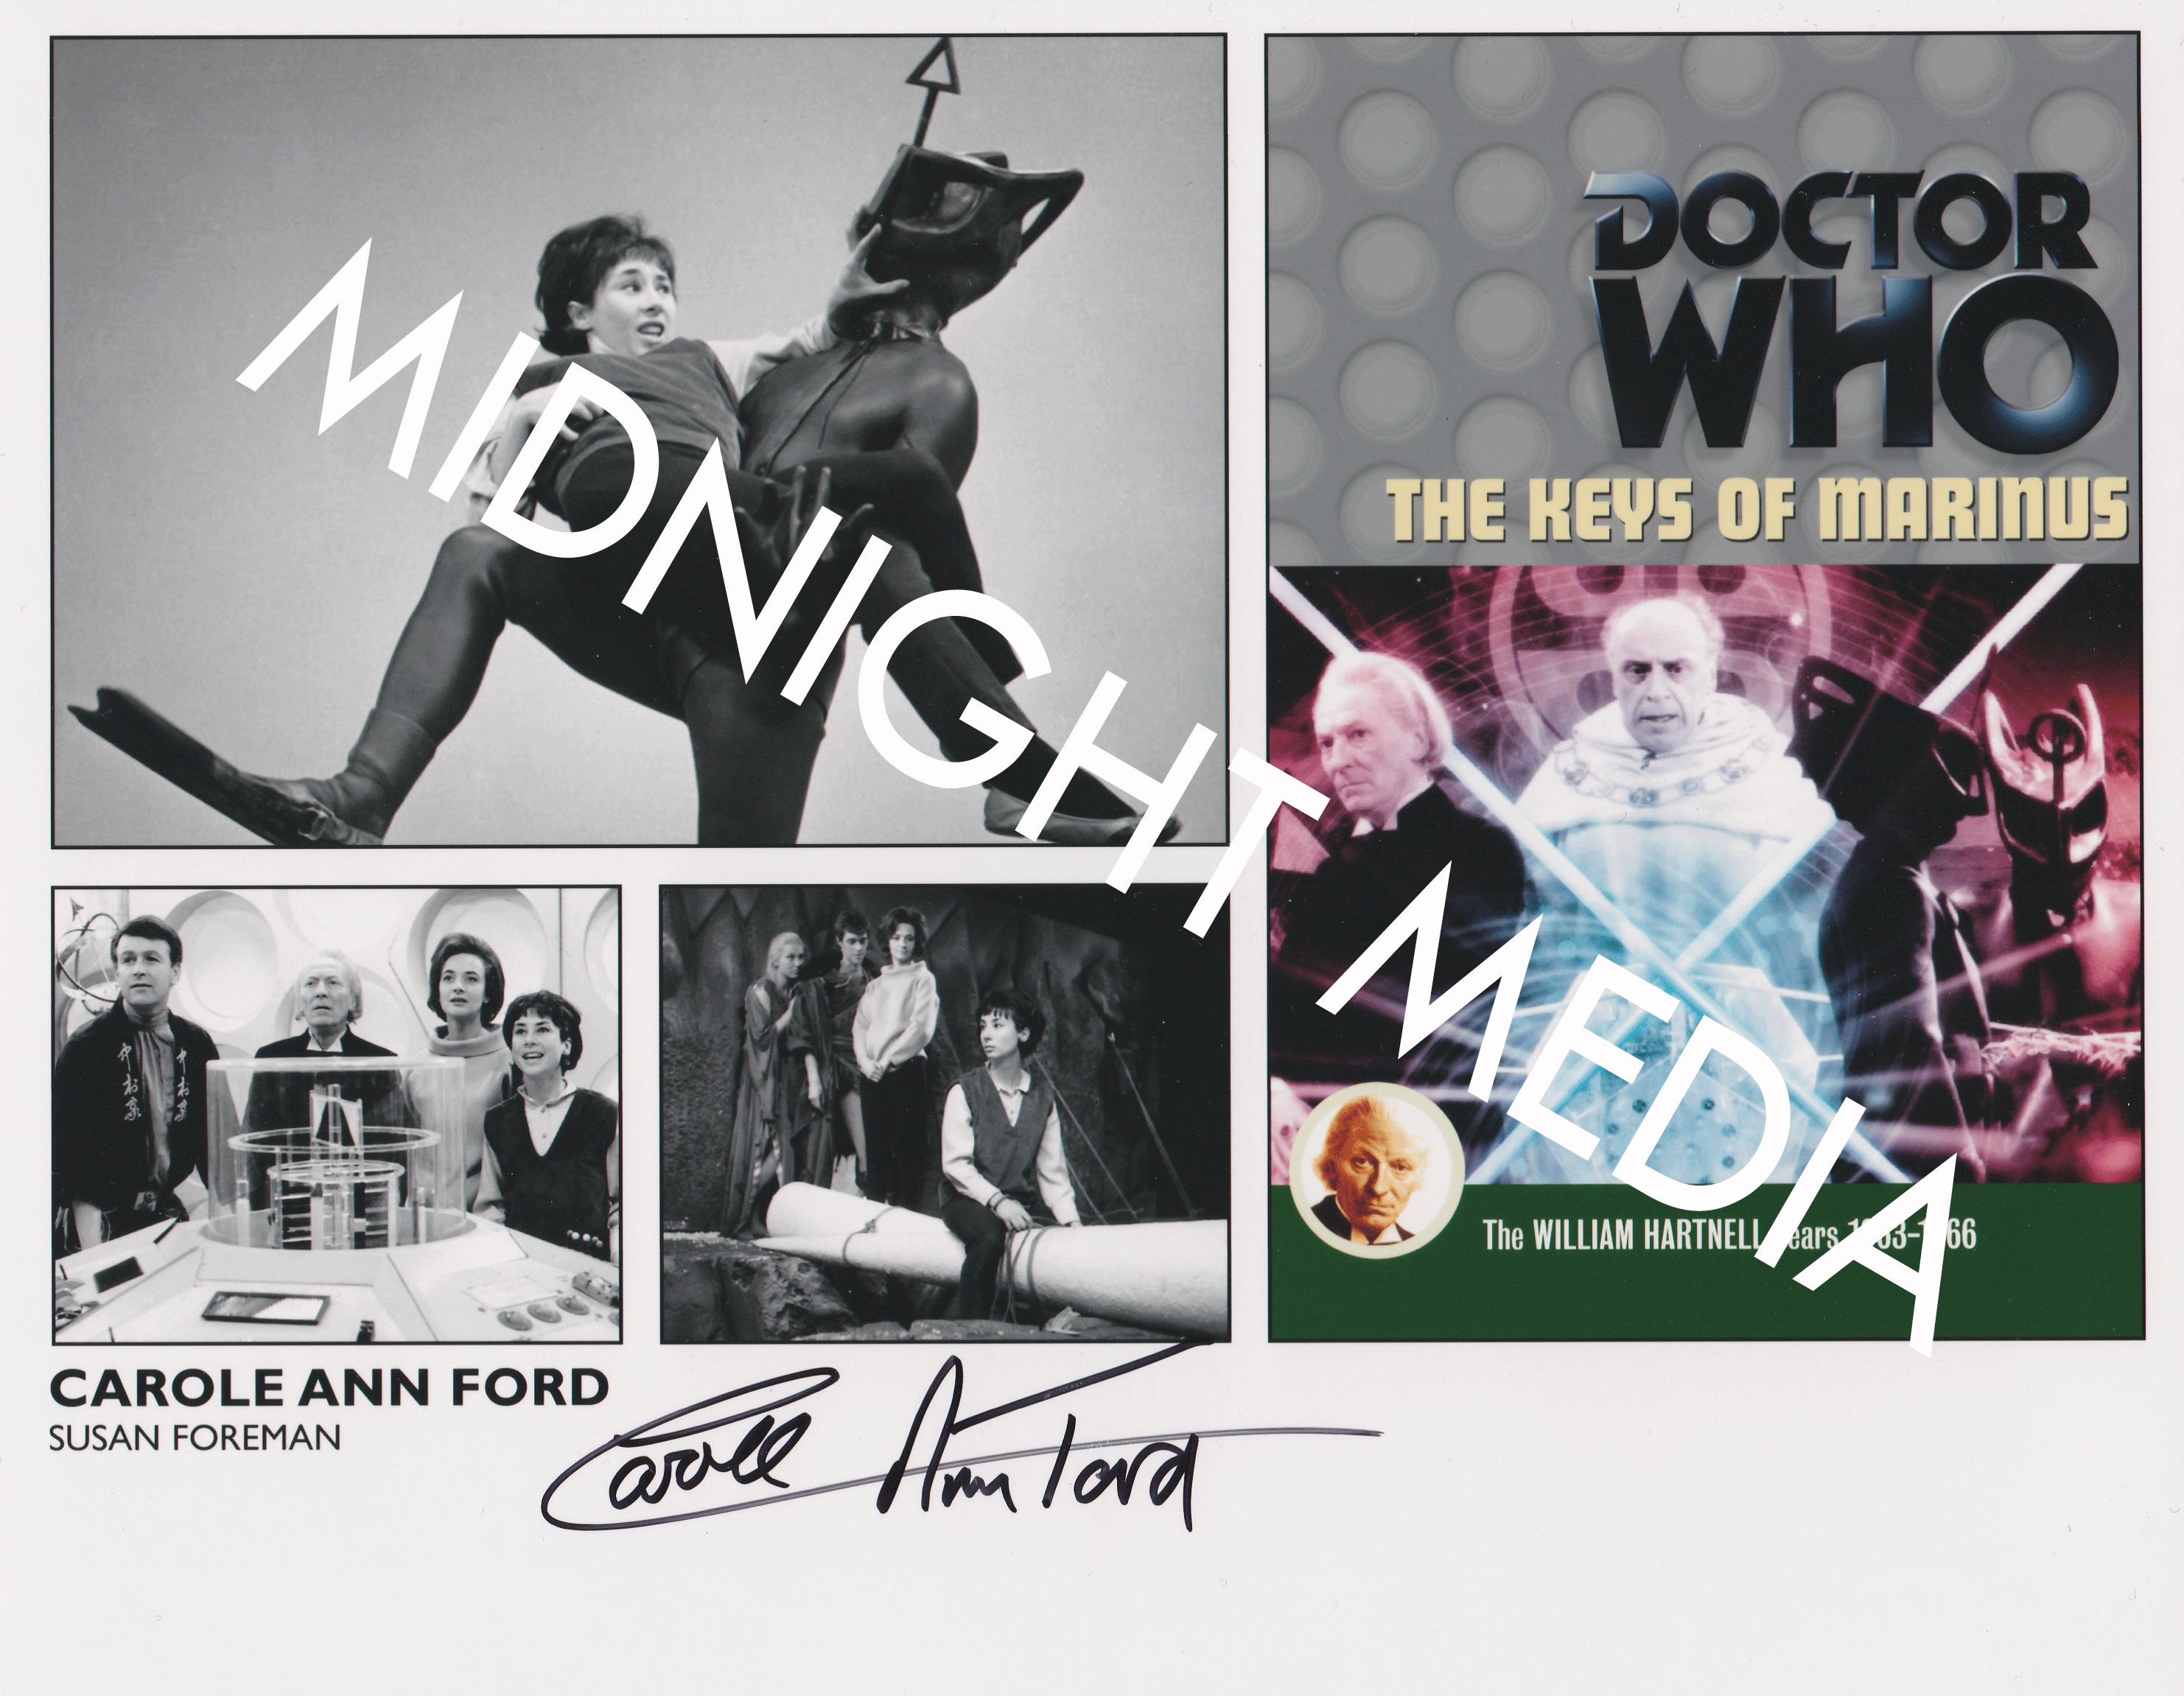 CAROLE ANN FORD SIGNED PHOTOGRAPH - DOCTOR WHO